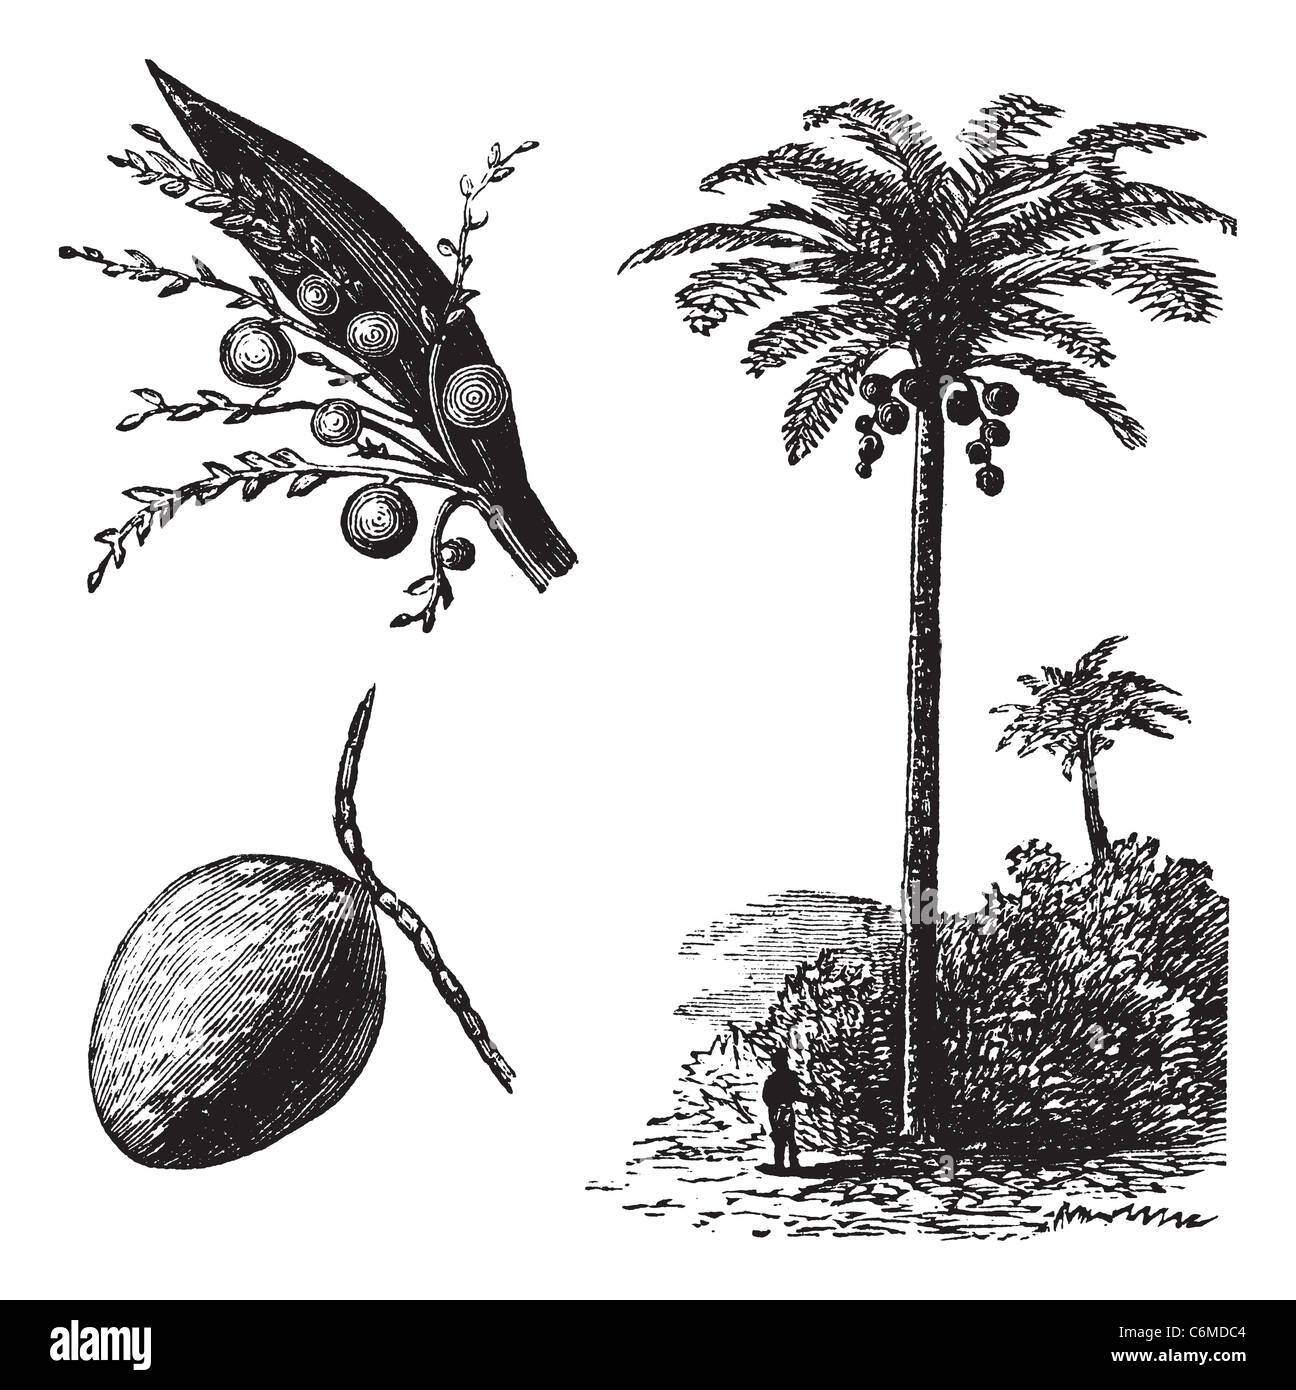 Coconut or Coconut Palm or Cocos nucifera, vintage engraving. Old engraved illustration of a Coconut tree showing flowers and fr Stock Photo